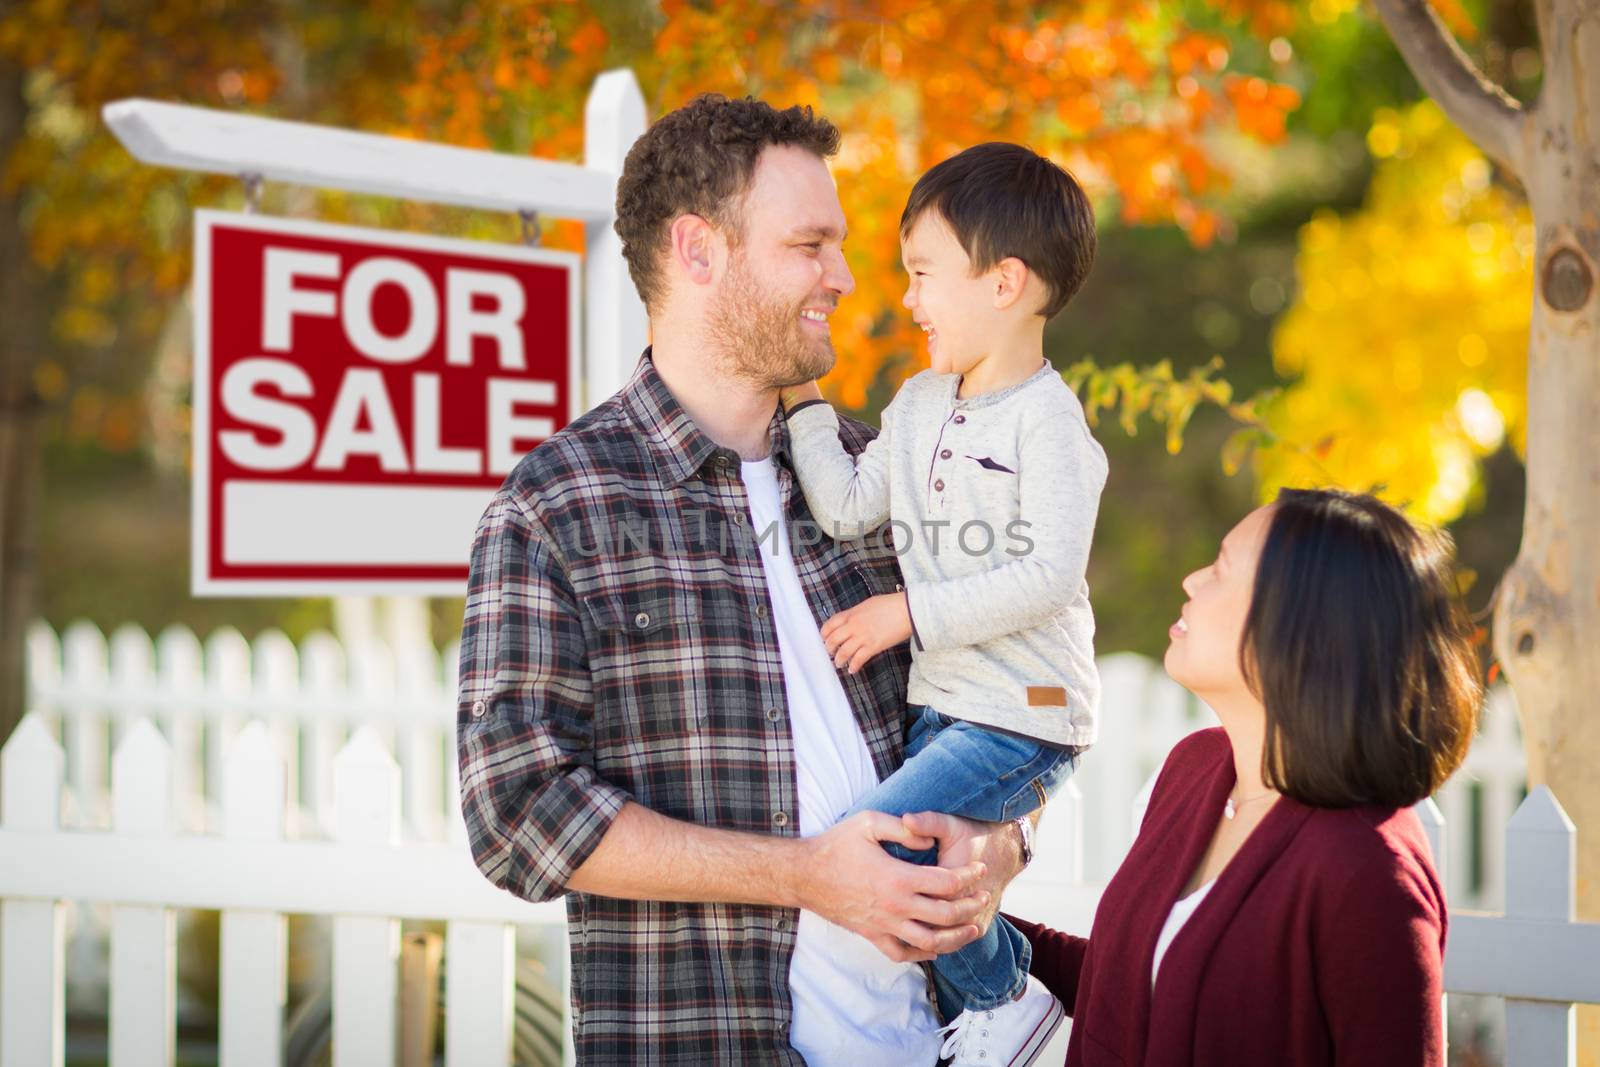 Mixed Race Chinese and Caucasian Parents and Child In Front of Fence and For Sale Real Estate Sign. by Feverpitched